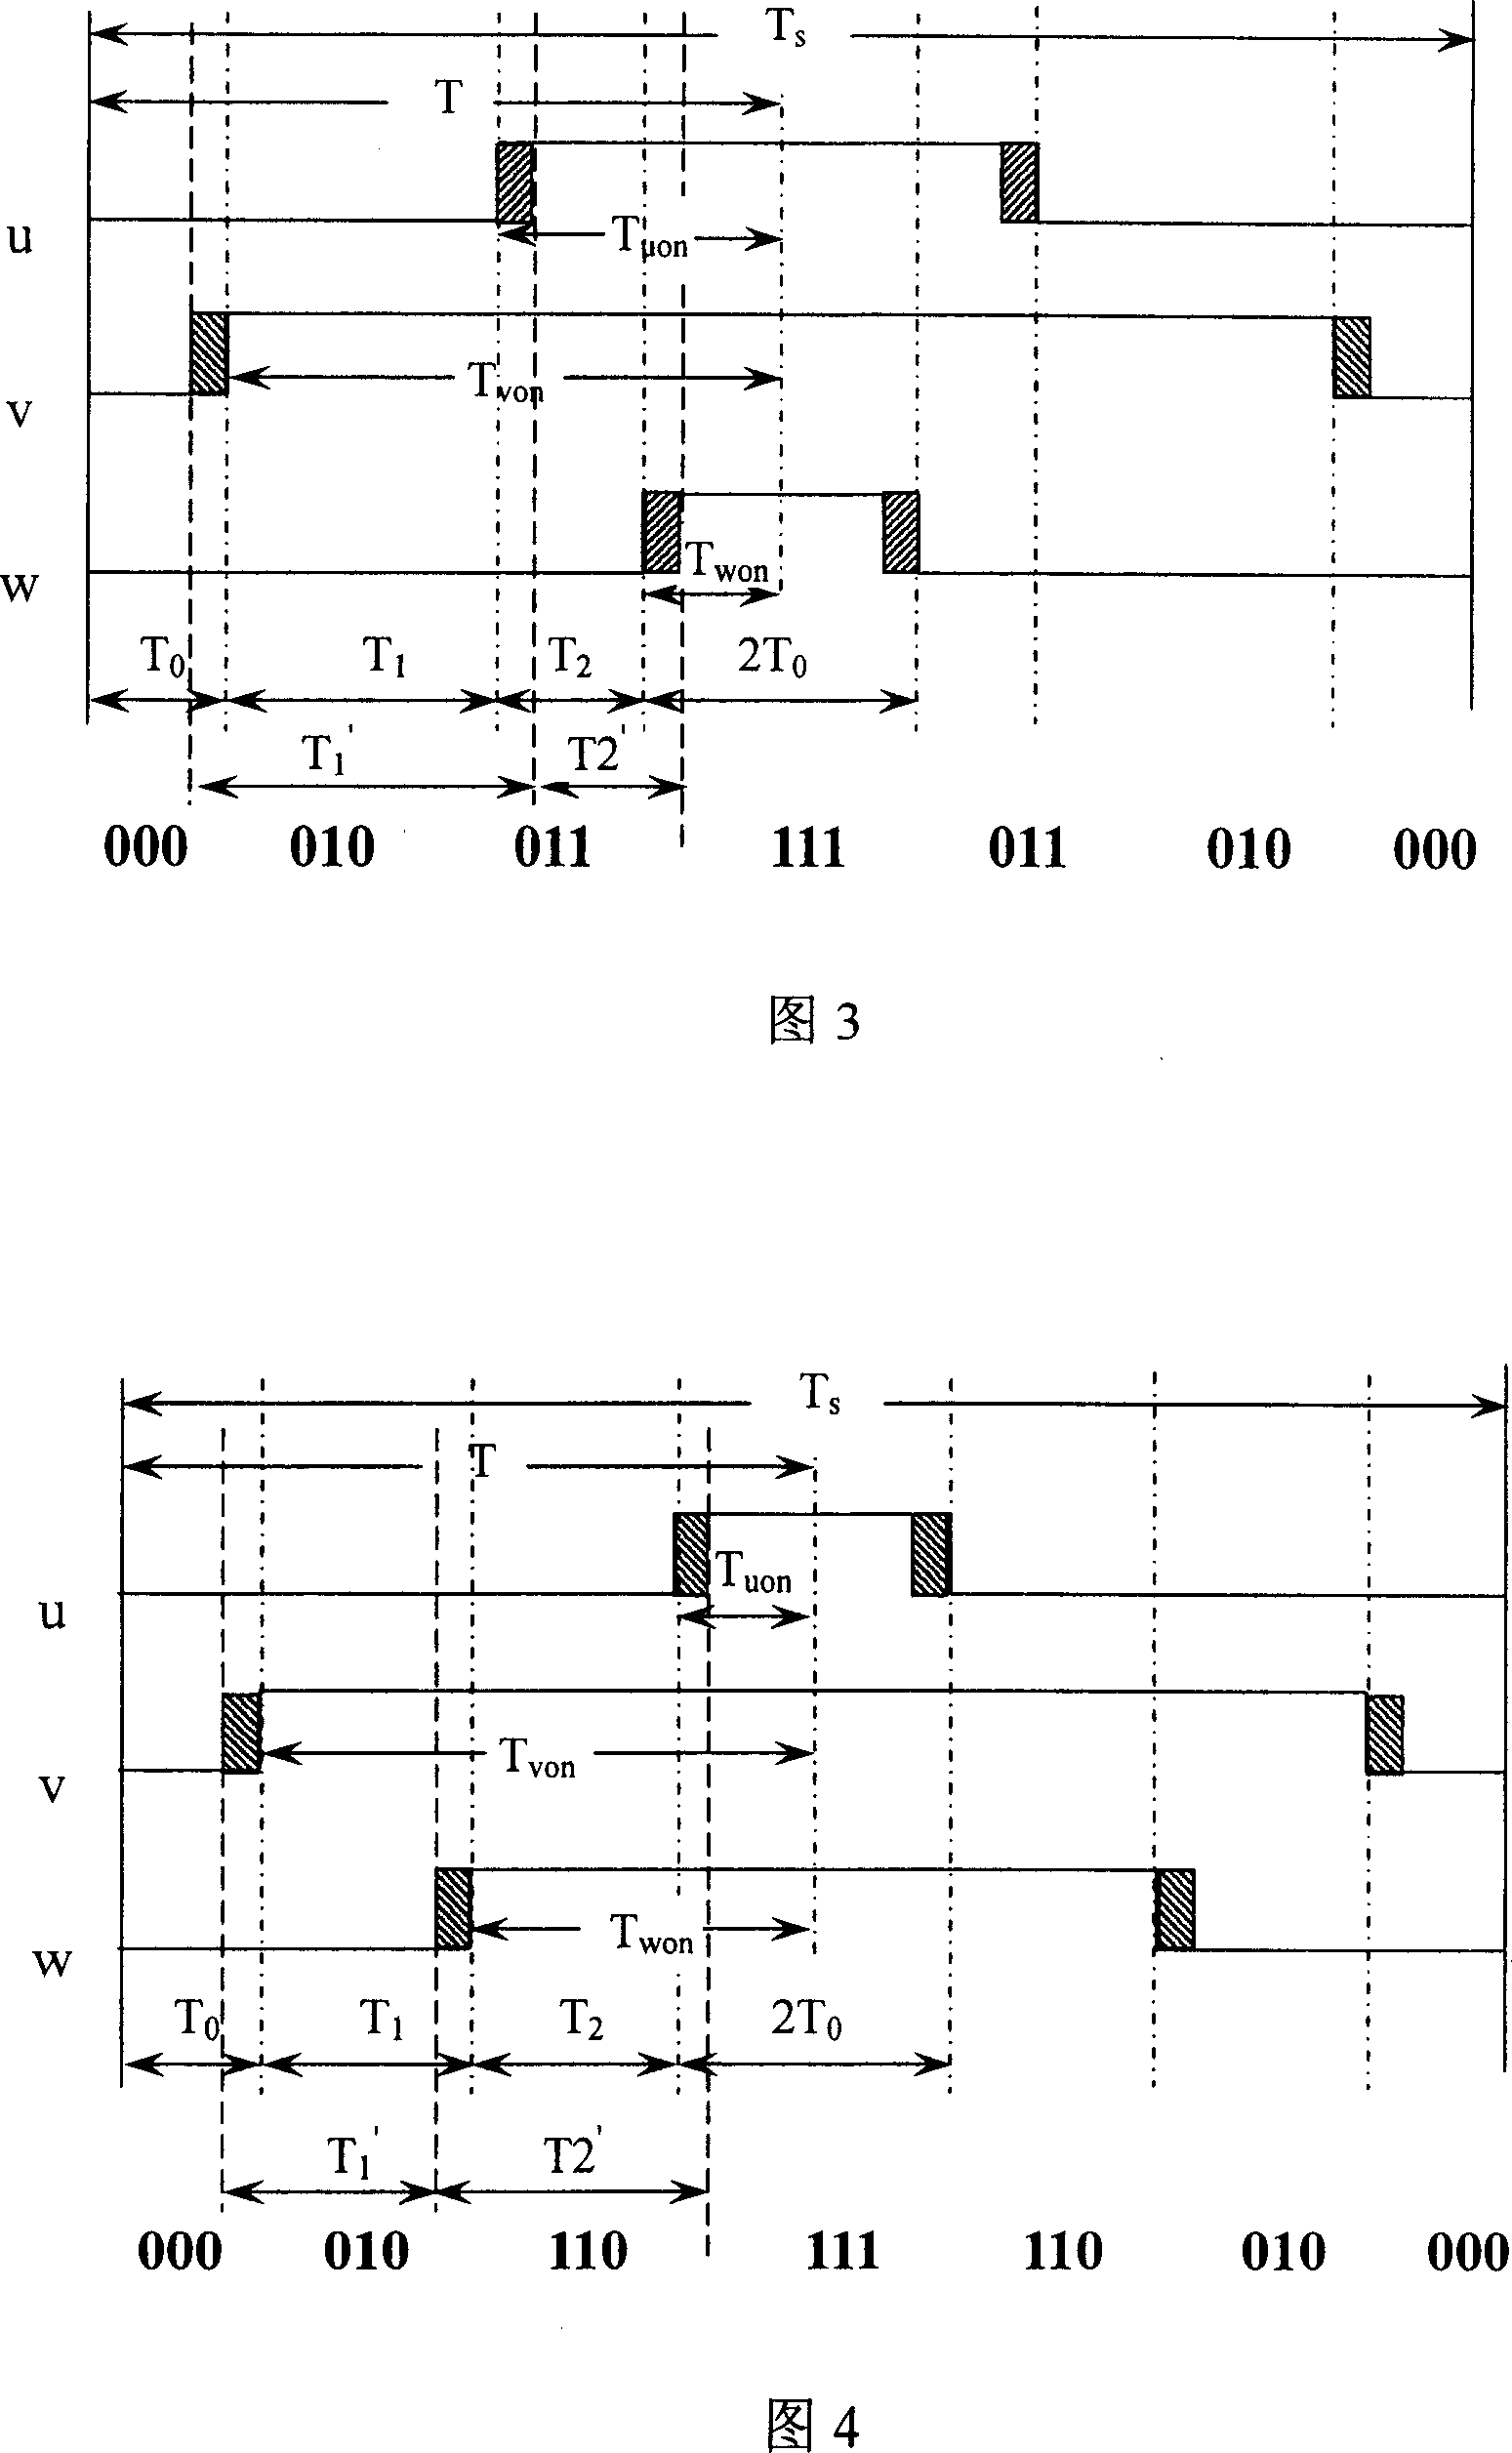 Dead zone compensating method for space vector pulse width modulating output